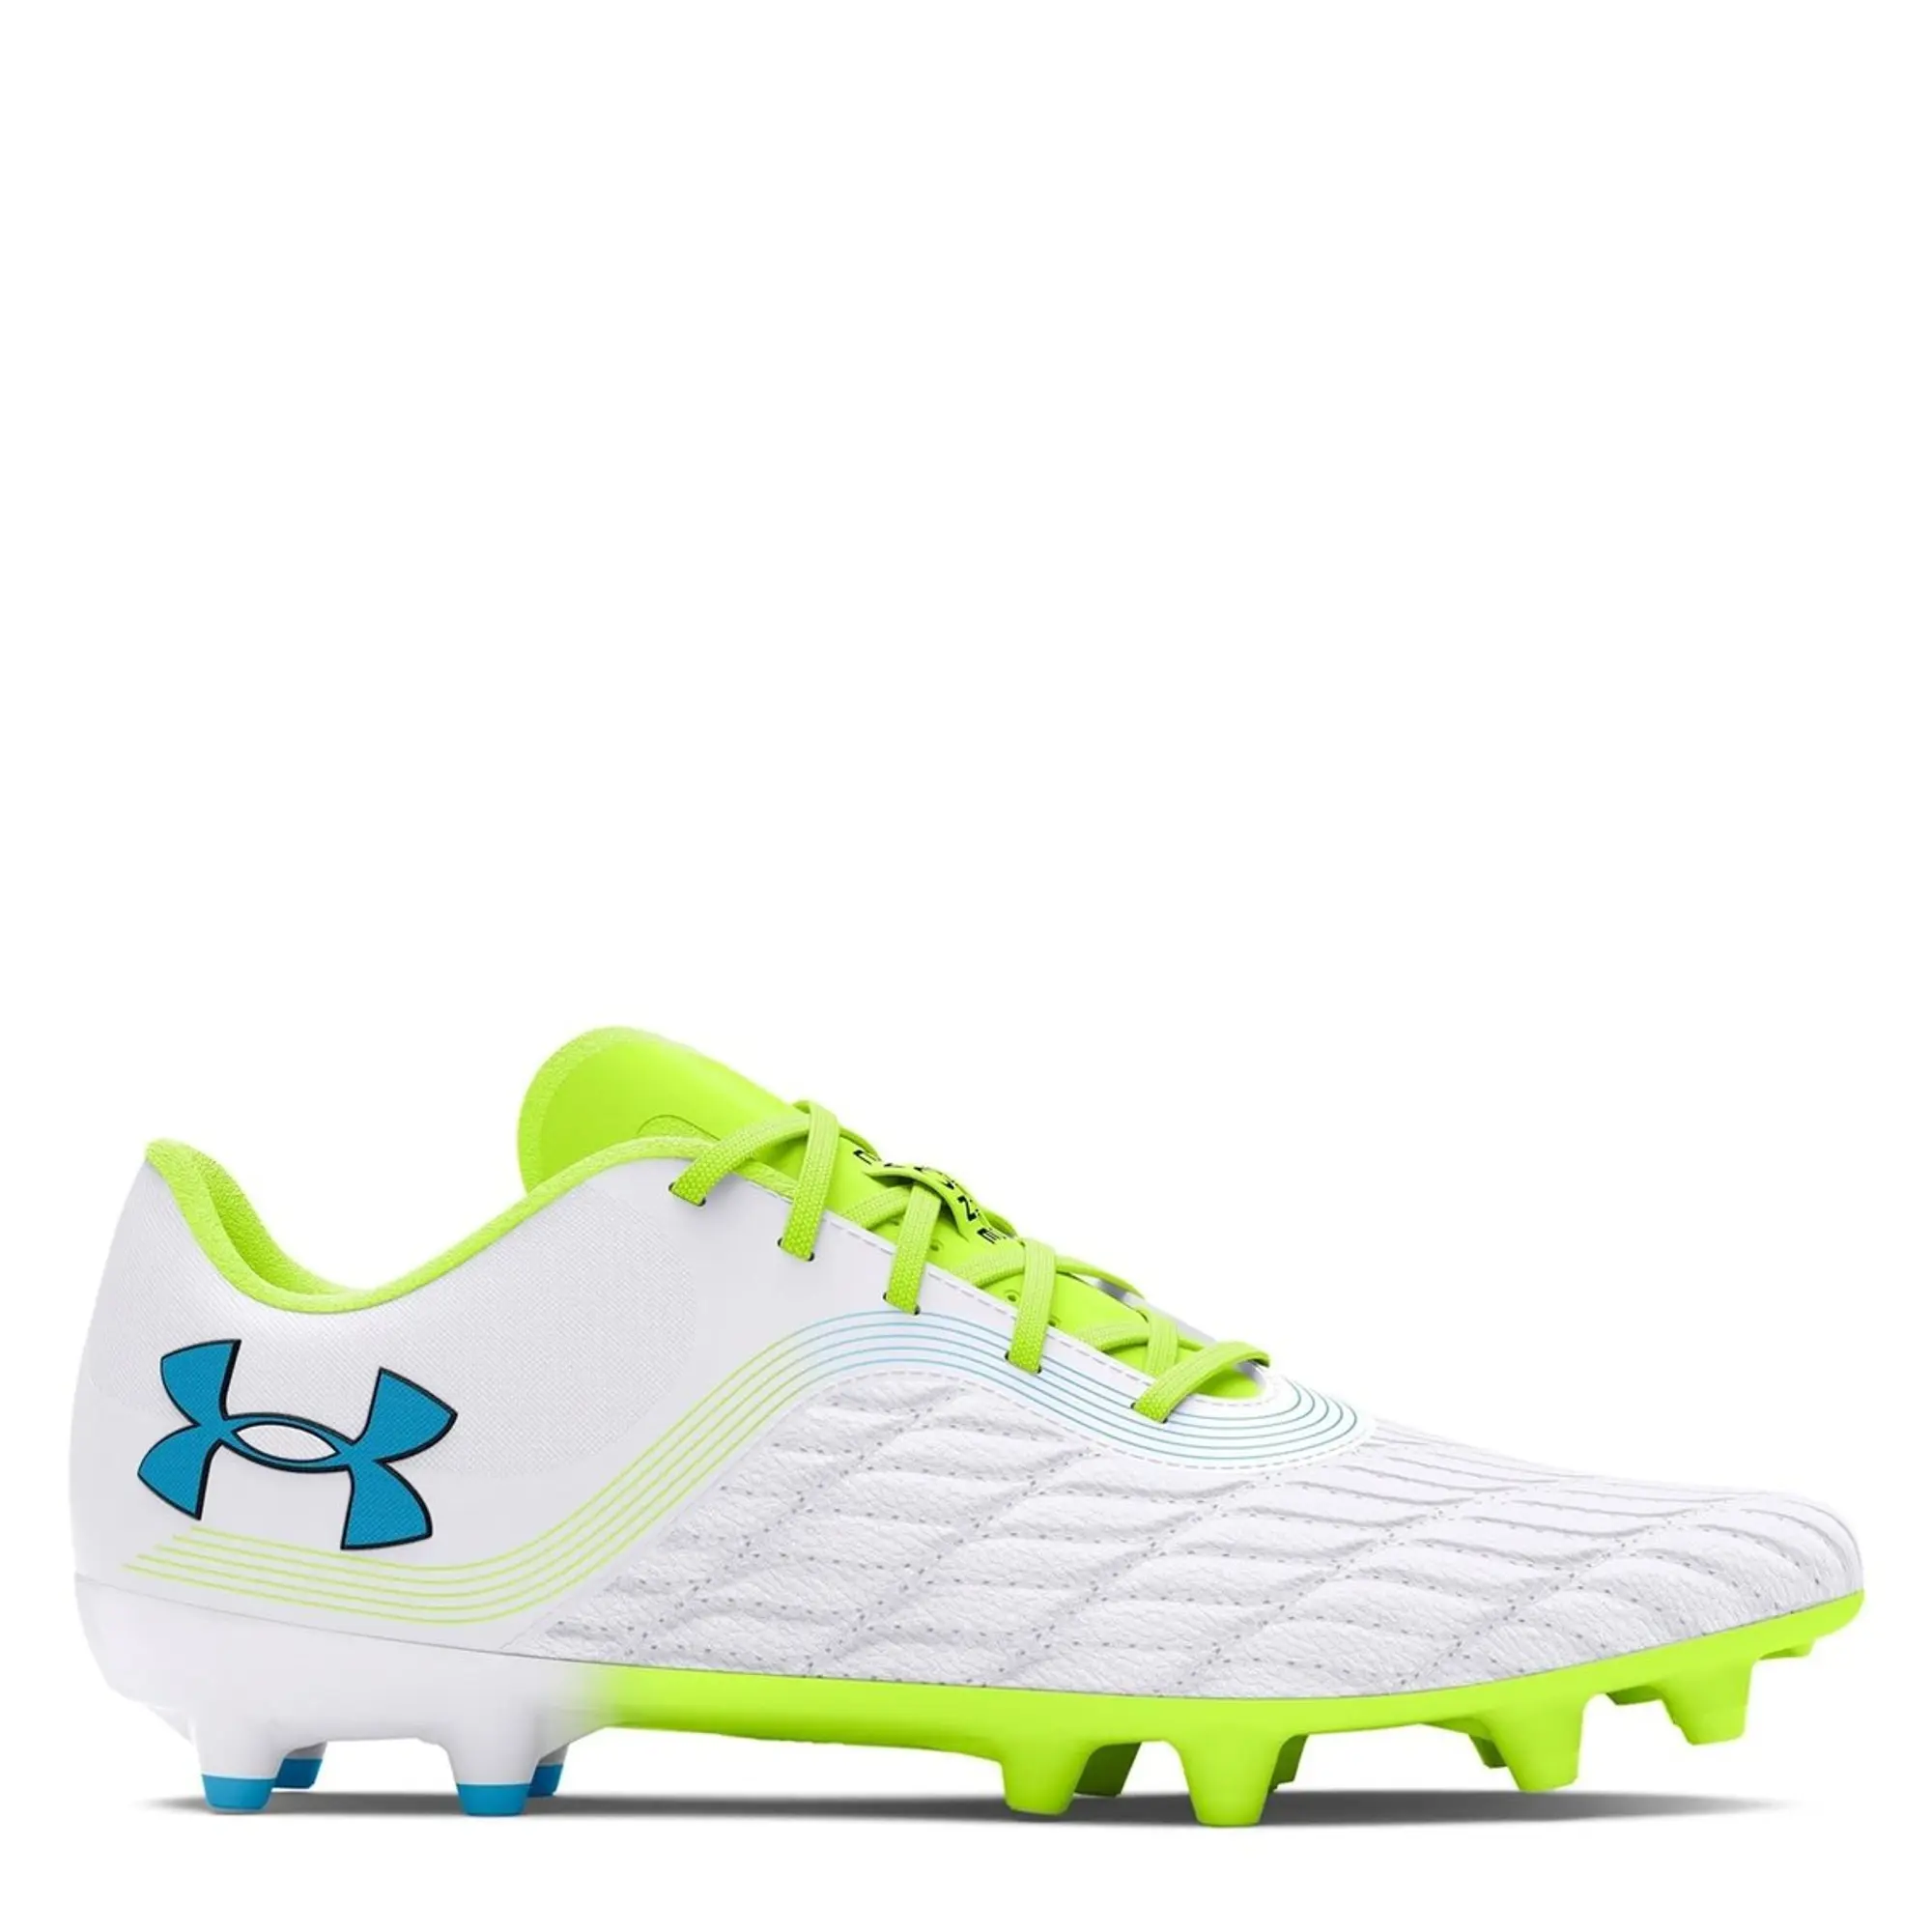 Under Armour Clone Magnetico Pro Firm Ground Football Boots